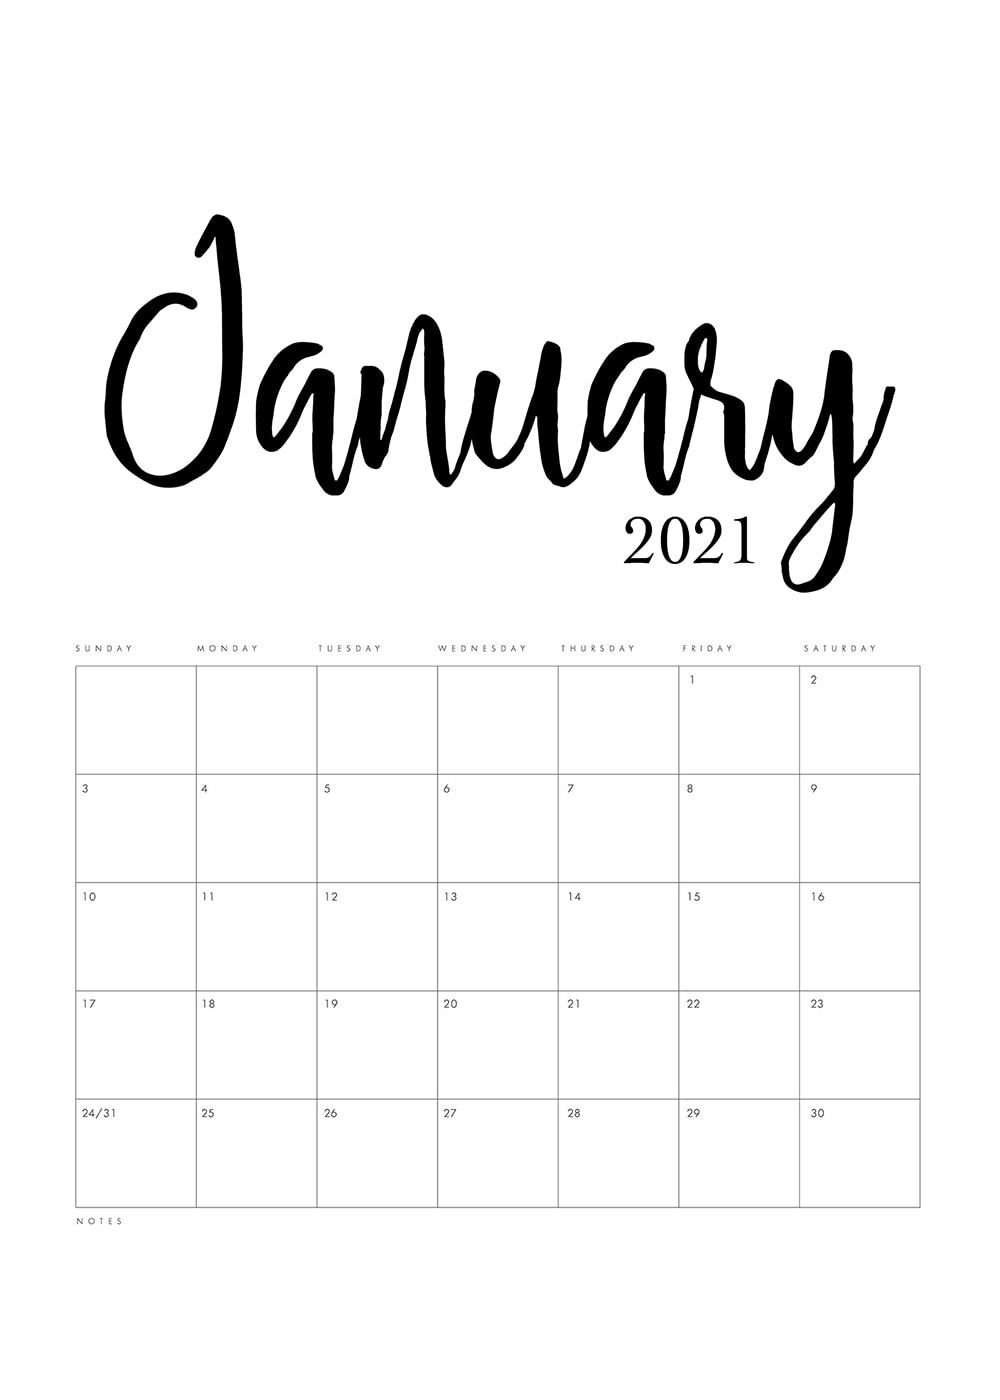 Get 2021 Calendars To Print Without Downloading